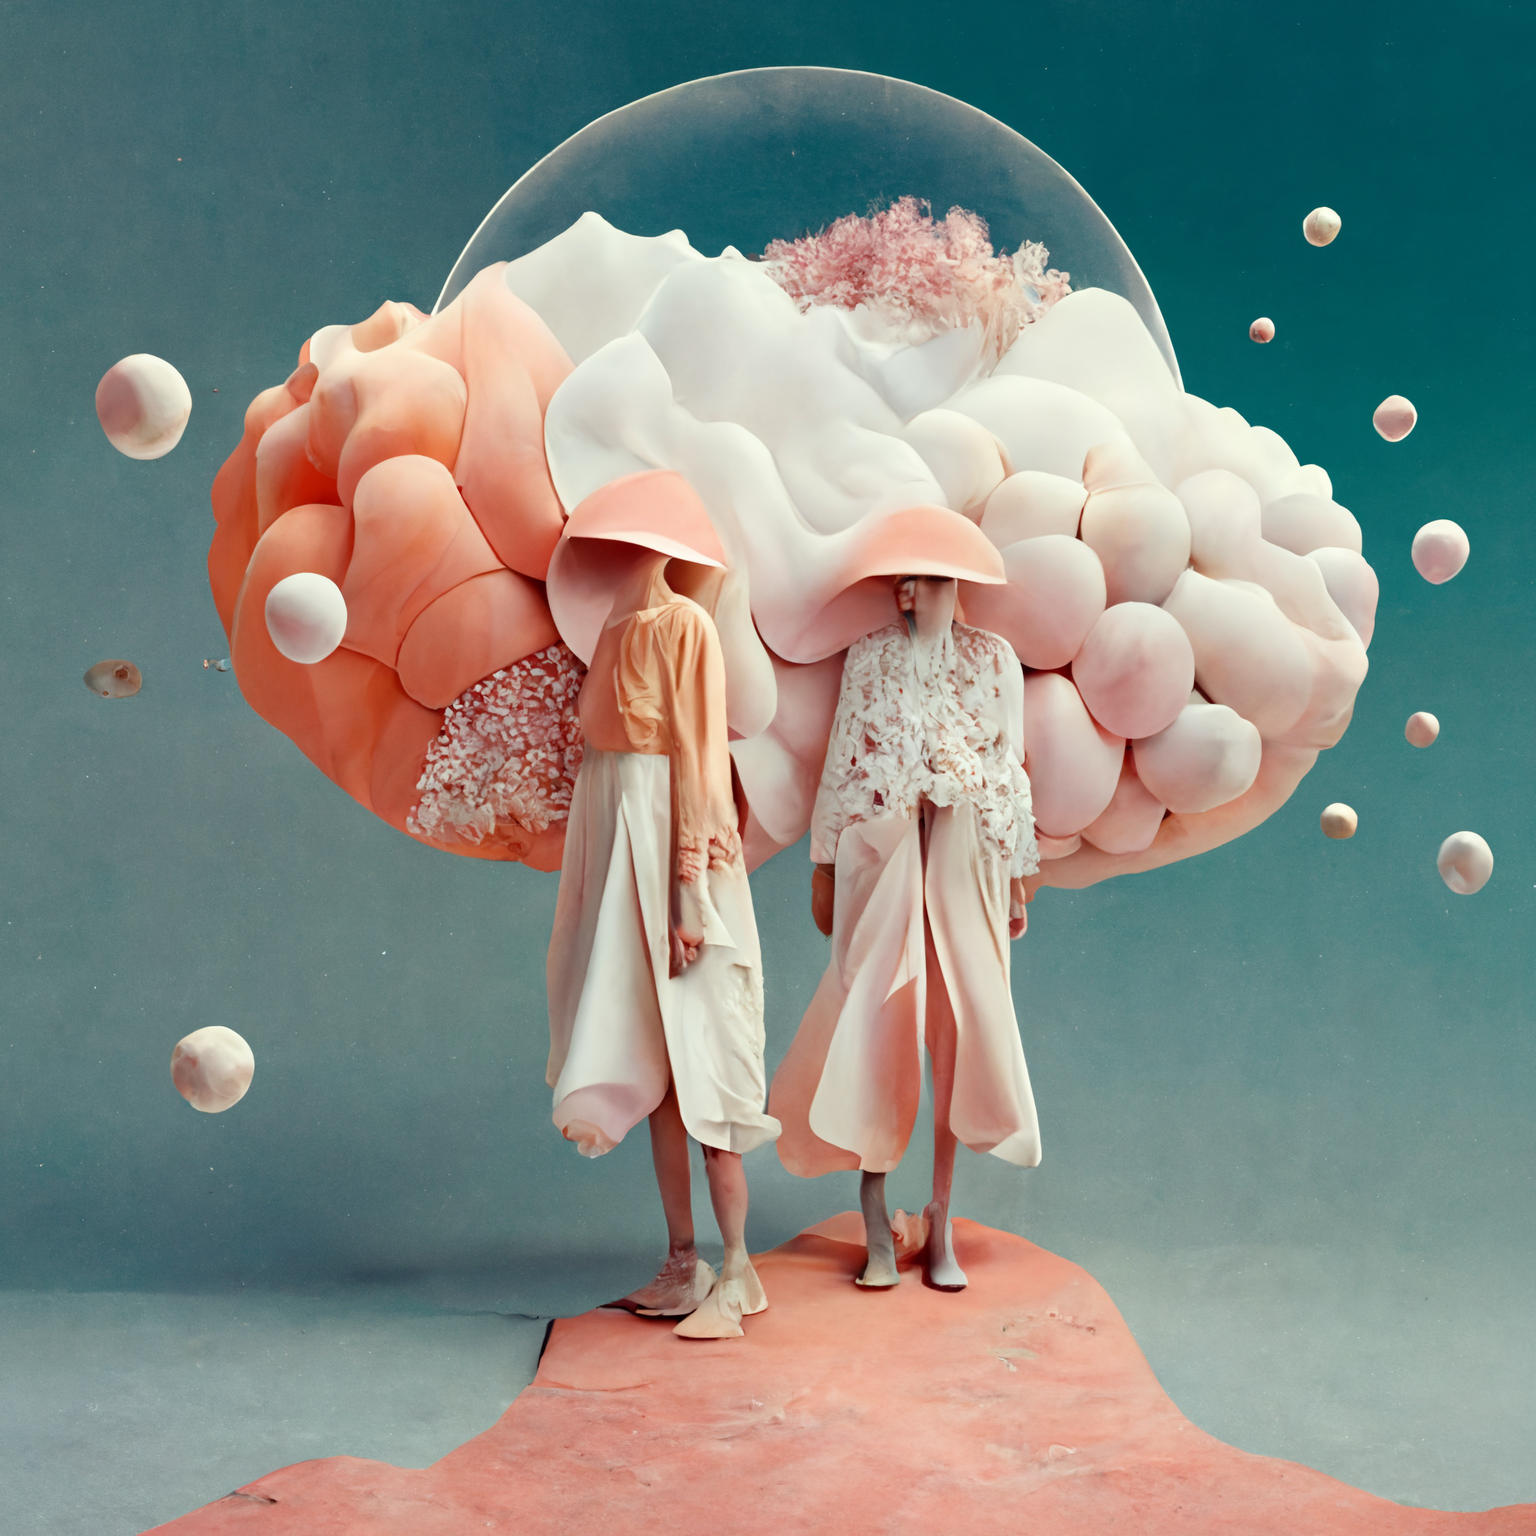 sines_gorgeous_surreal_ethereal_Olivia_Locher_and_Erik_Ma_eff4e6ce-d613-4cba-bf8a-e90a43bd0d32